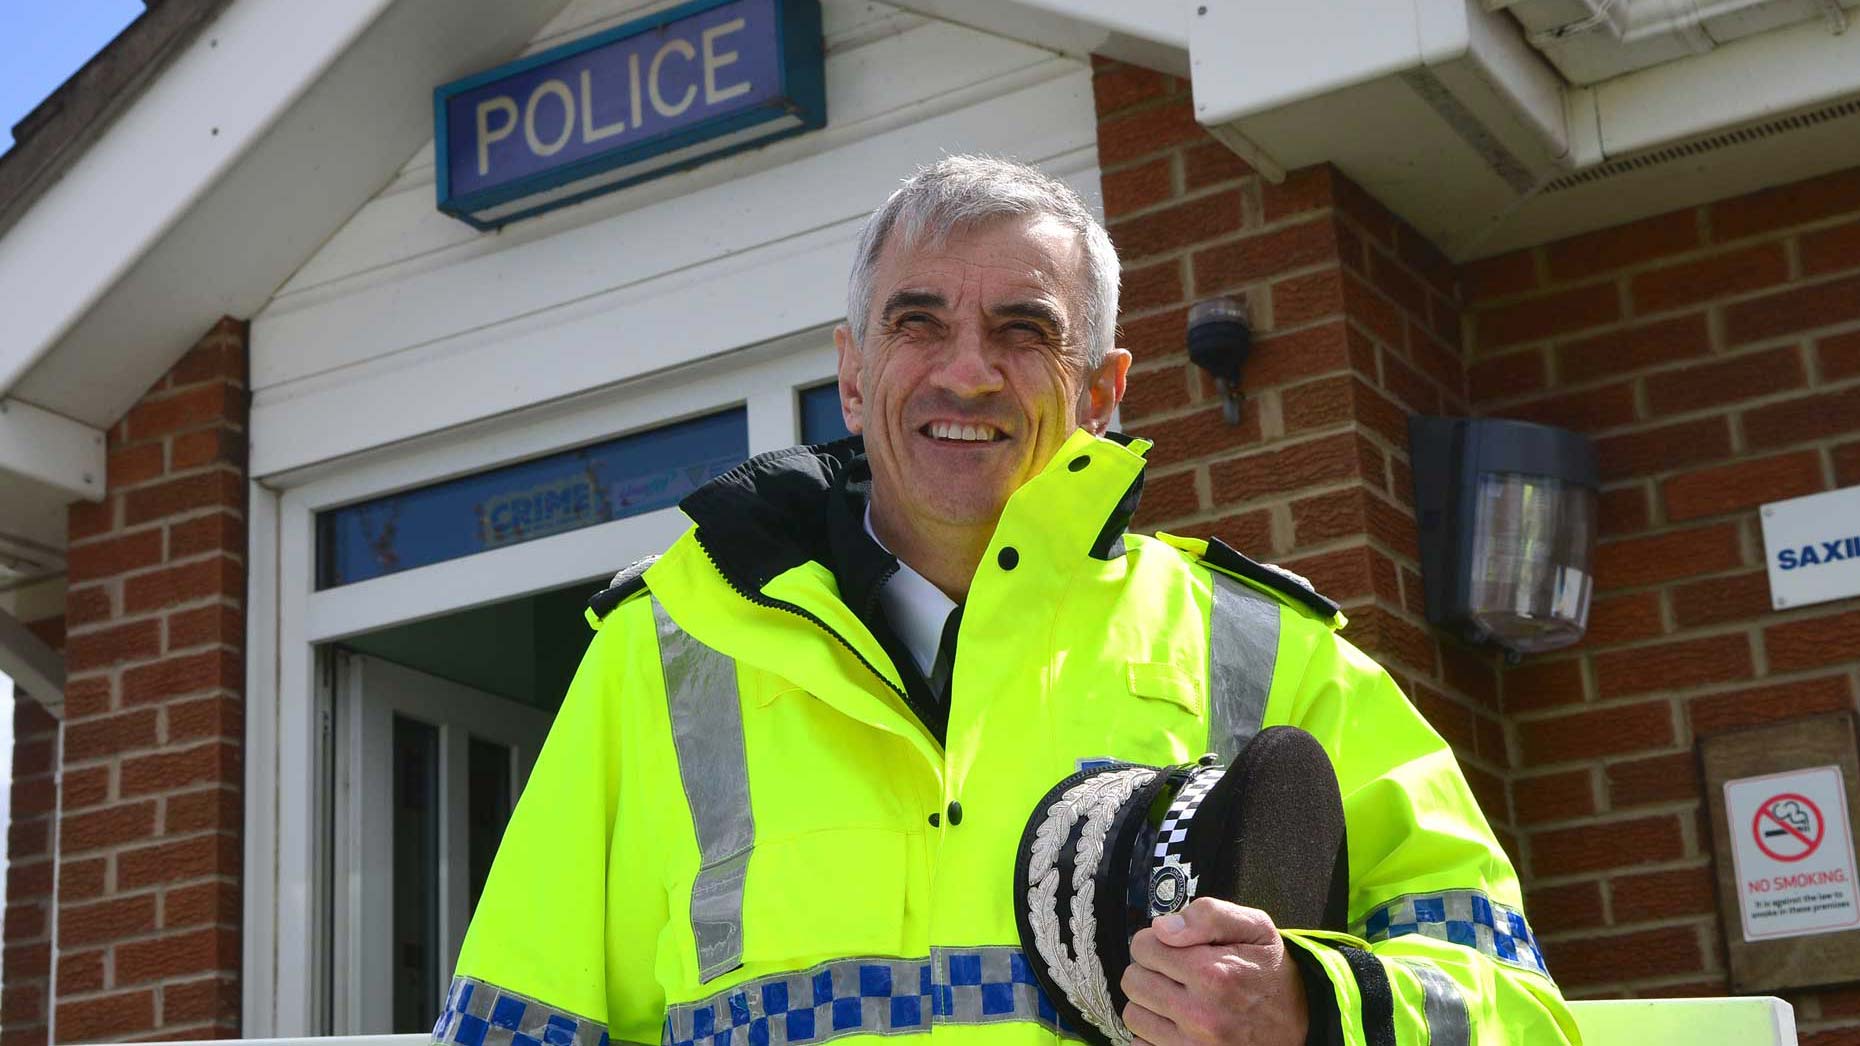 Lincolnshire Police Chief Constable Neil Rhodes. Photo: Steve Smailes for The Lincolnite